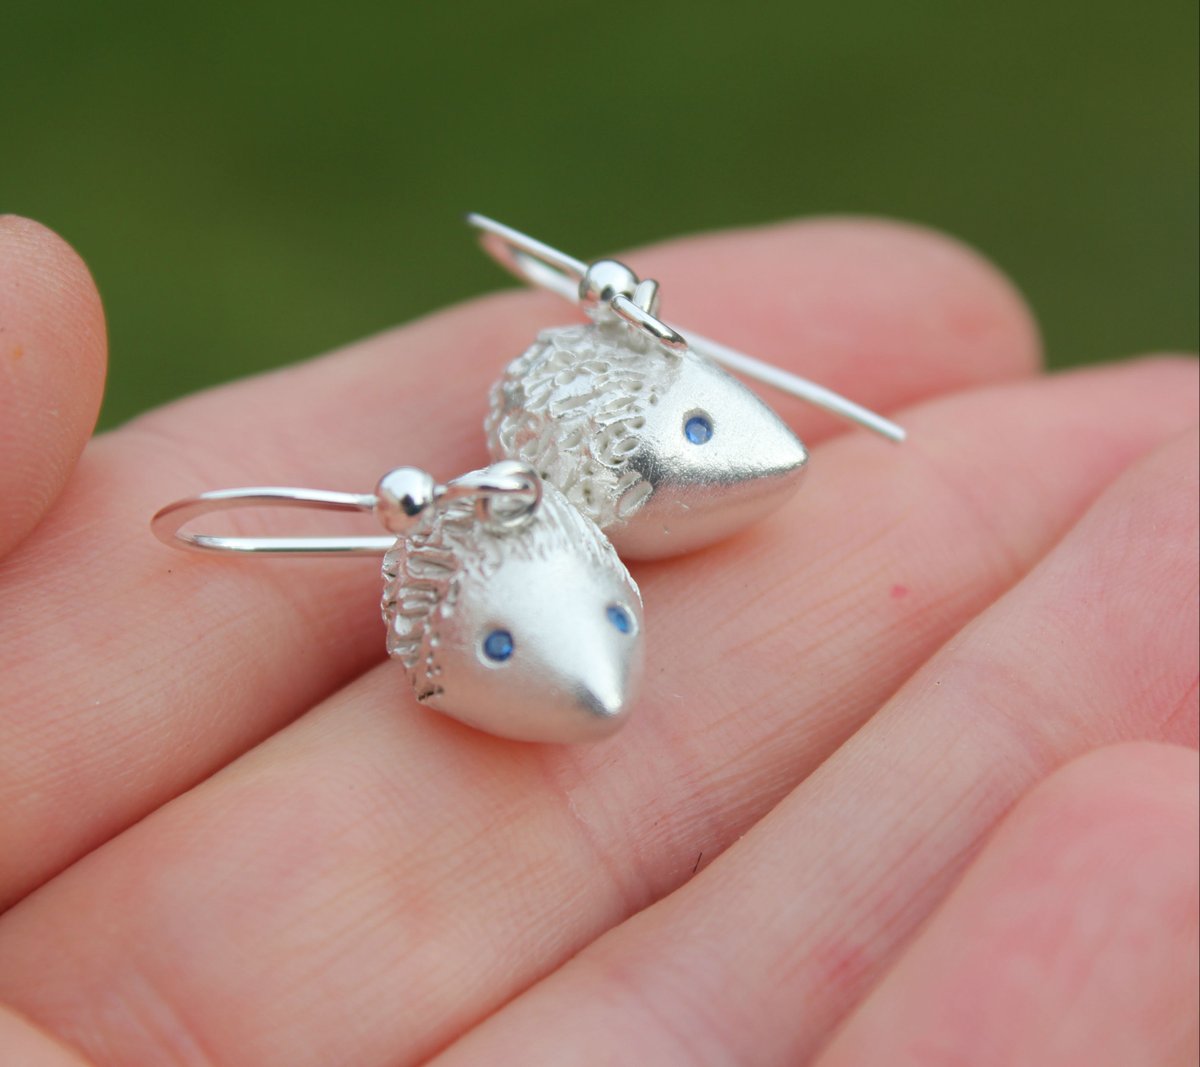 Did you catch me on BBC One? Making more of these as fast as I can - but I do make other designs lovely people - lots of other #wildlife! littlesilverhedgehog.etsy.com